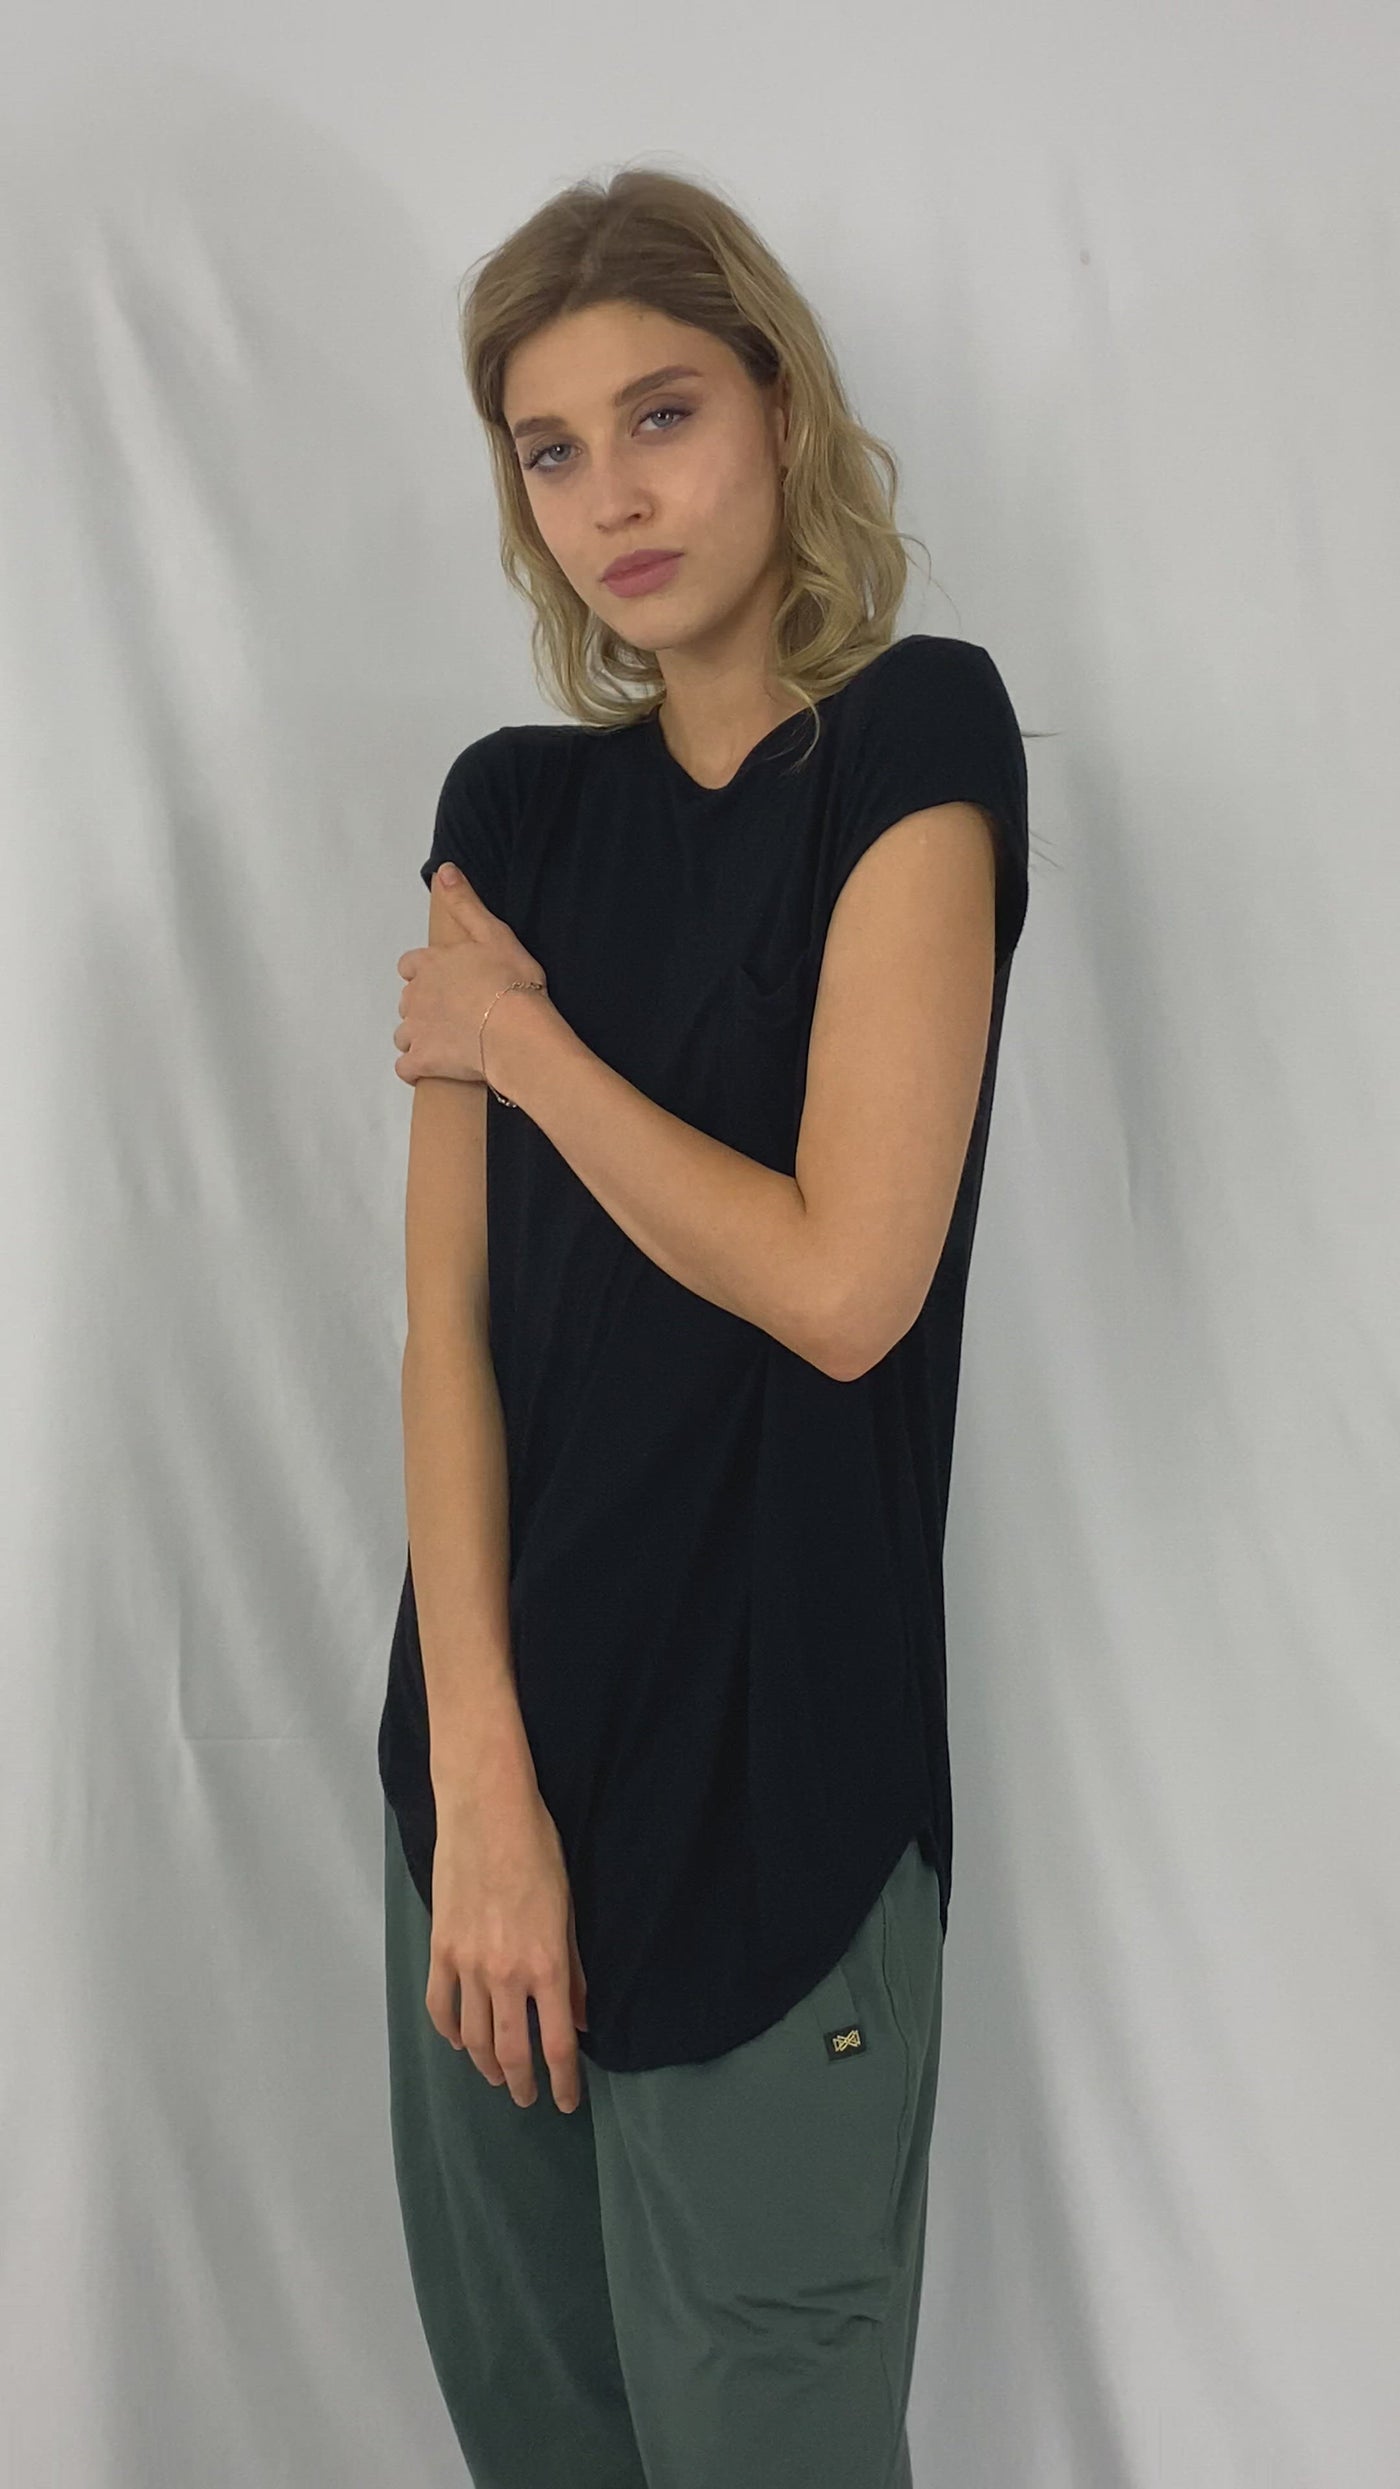 Womens Black Modal Sustainable t shirt for sleep or streetwear by Ekoluxe Ethical Fashion Brand